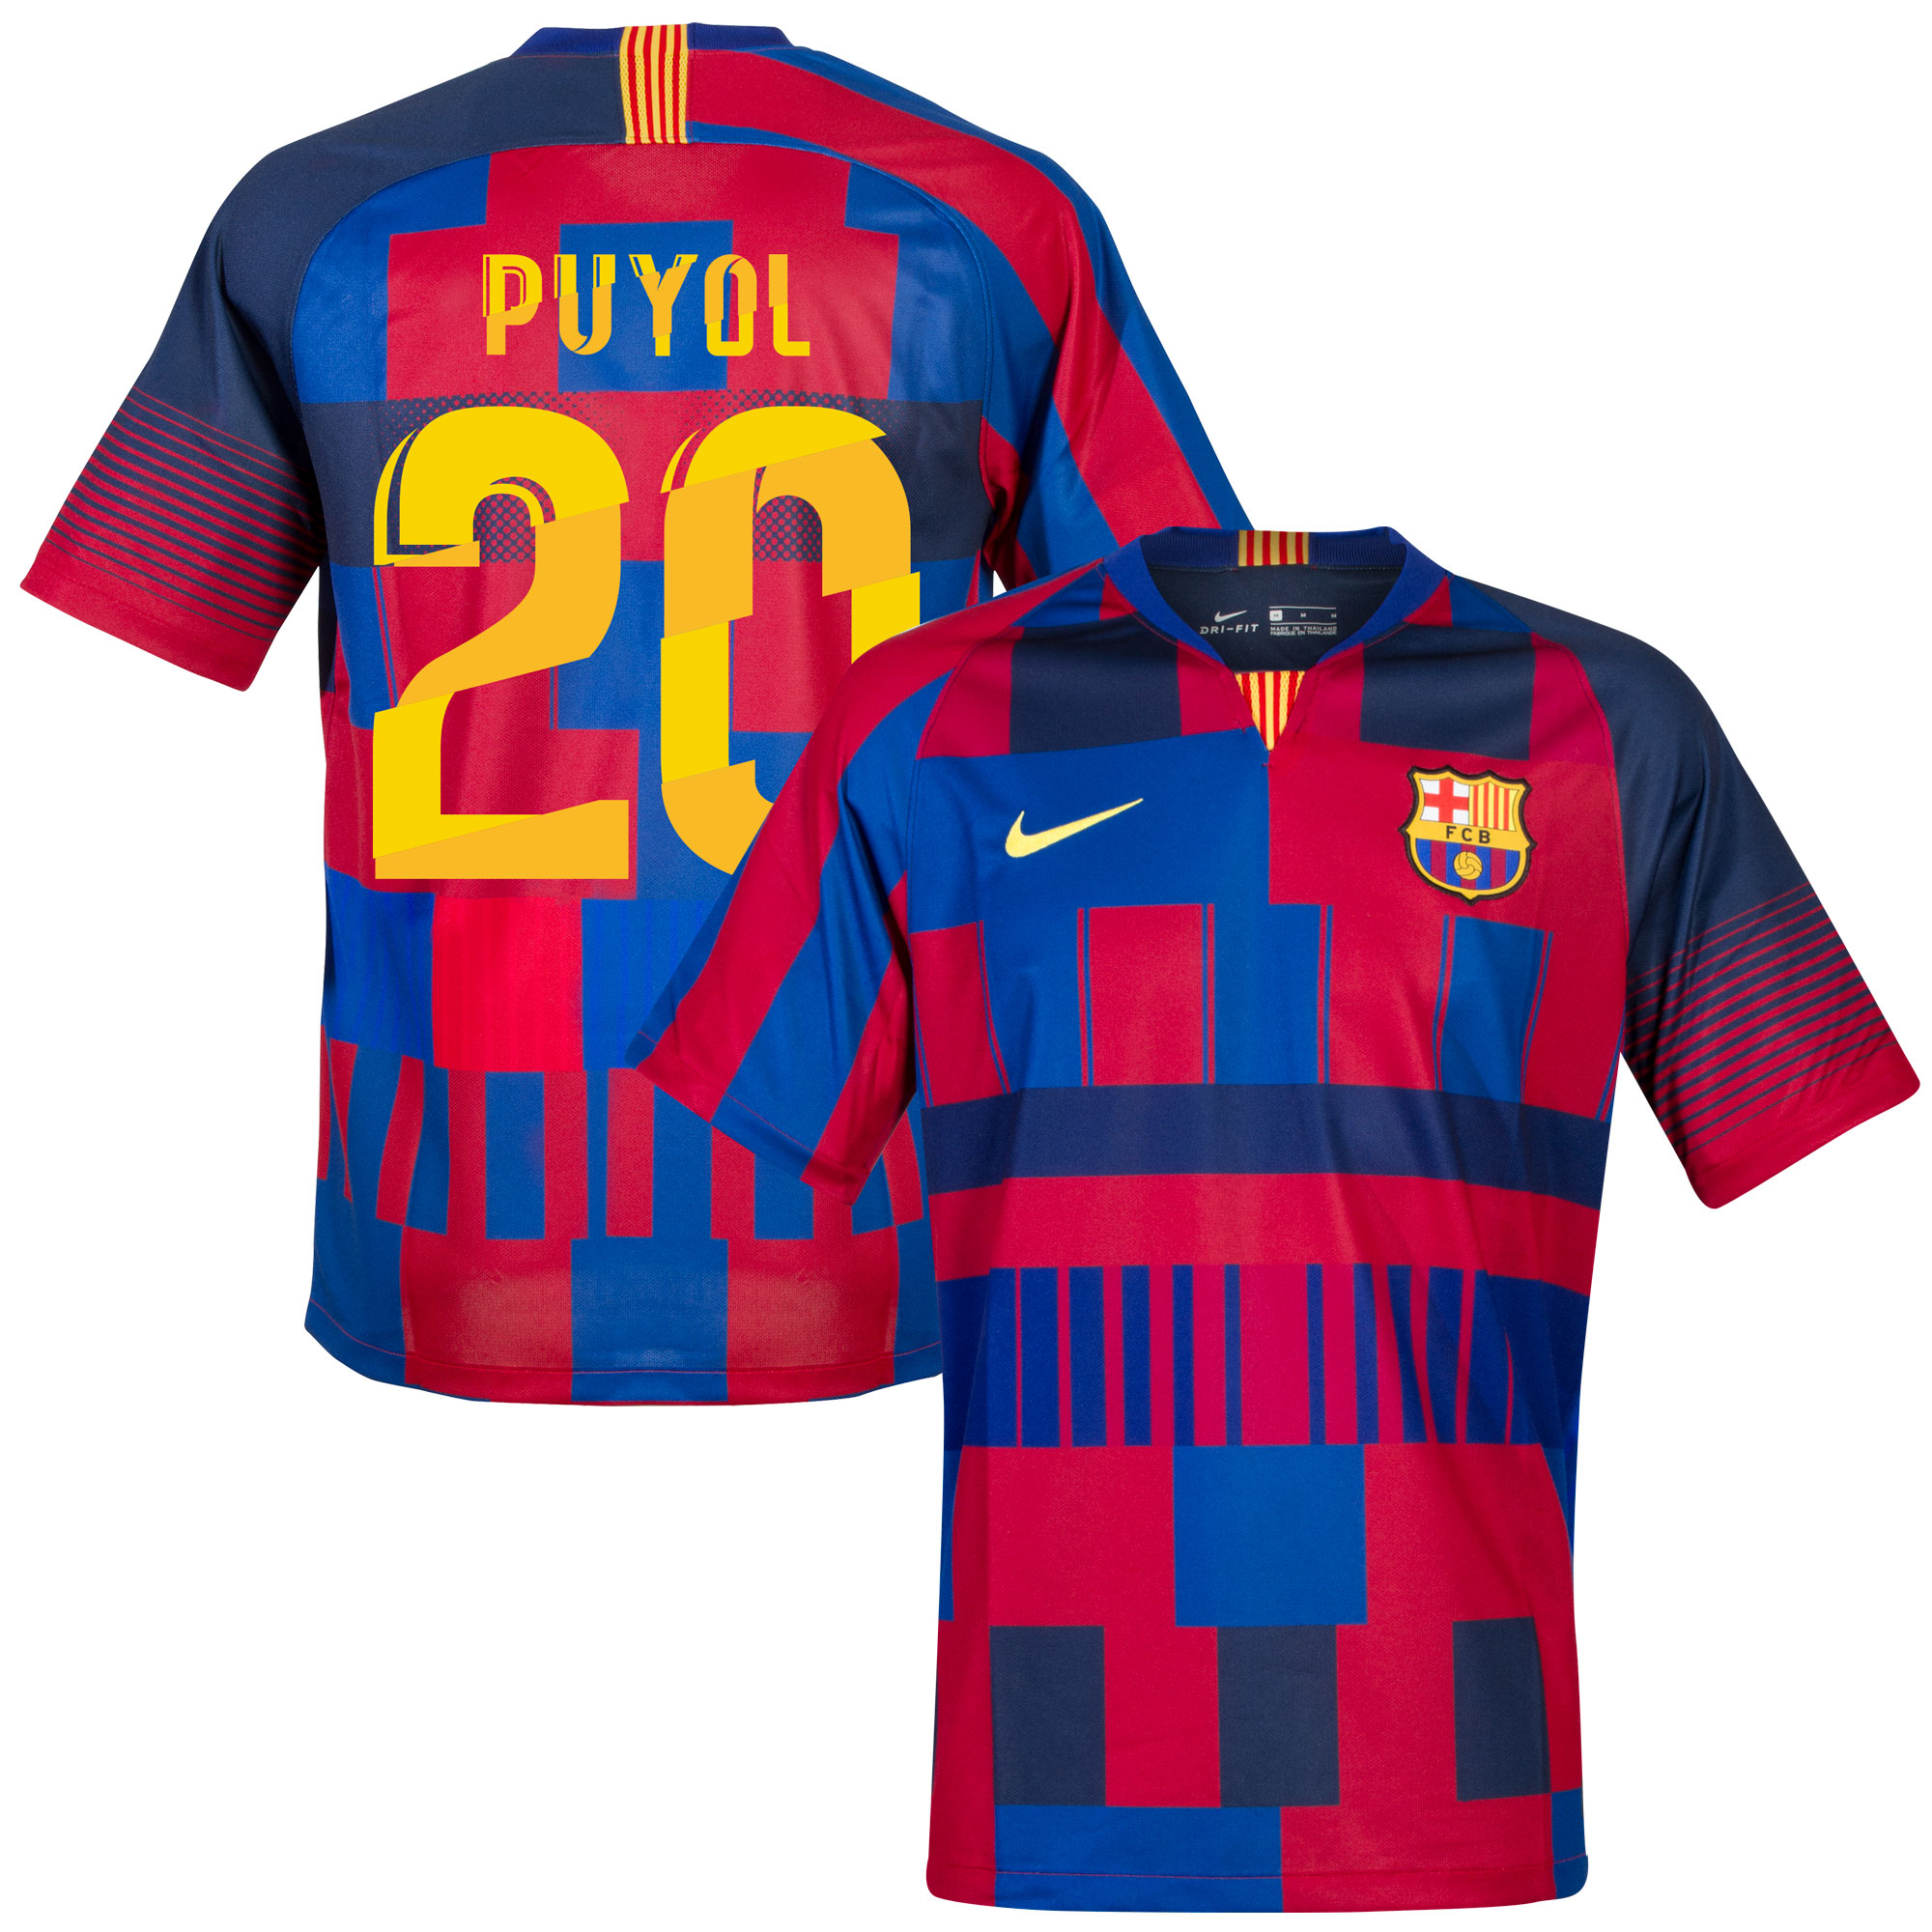 Barcelona x Nike 20th Anniversary Voetbalshirt + Puyol 20 (Special Edition Fan Style Printing) S